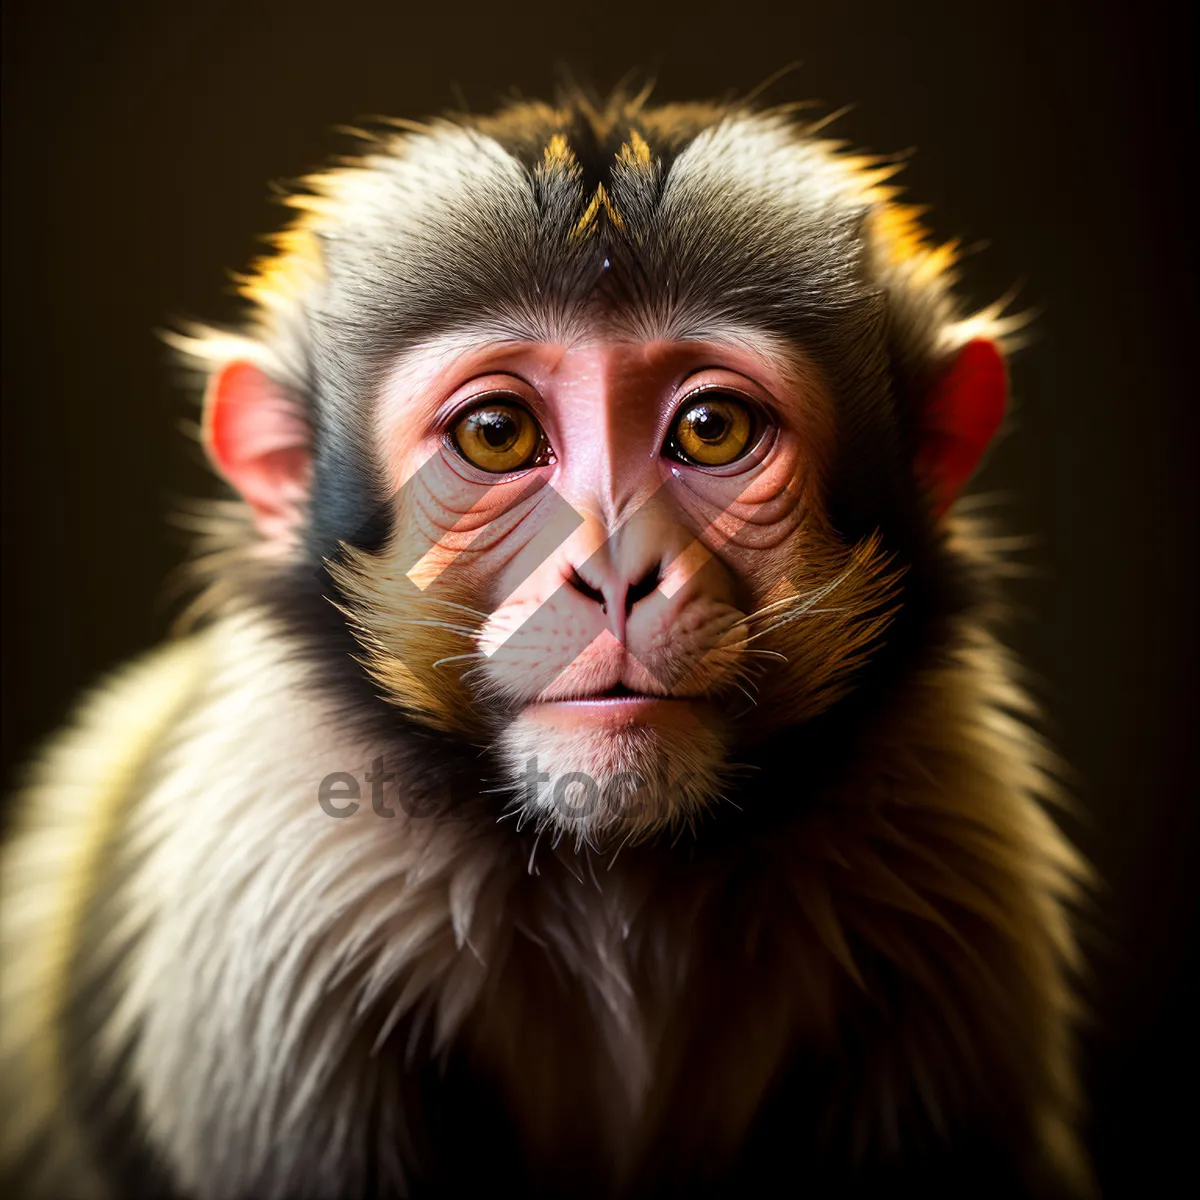 Picture of Majestic Macaque: Enchanting Wild Primate Portrait